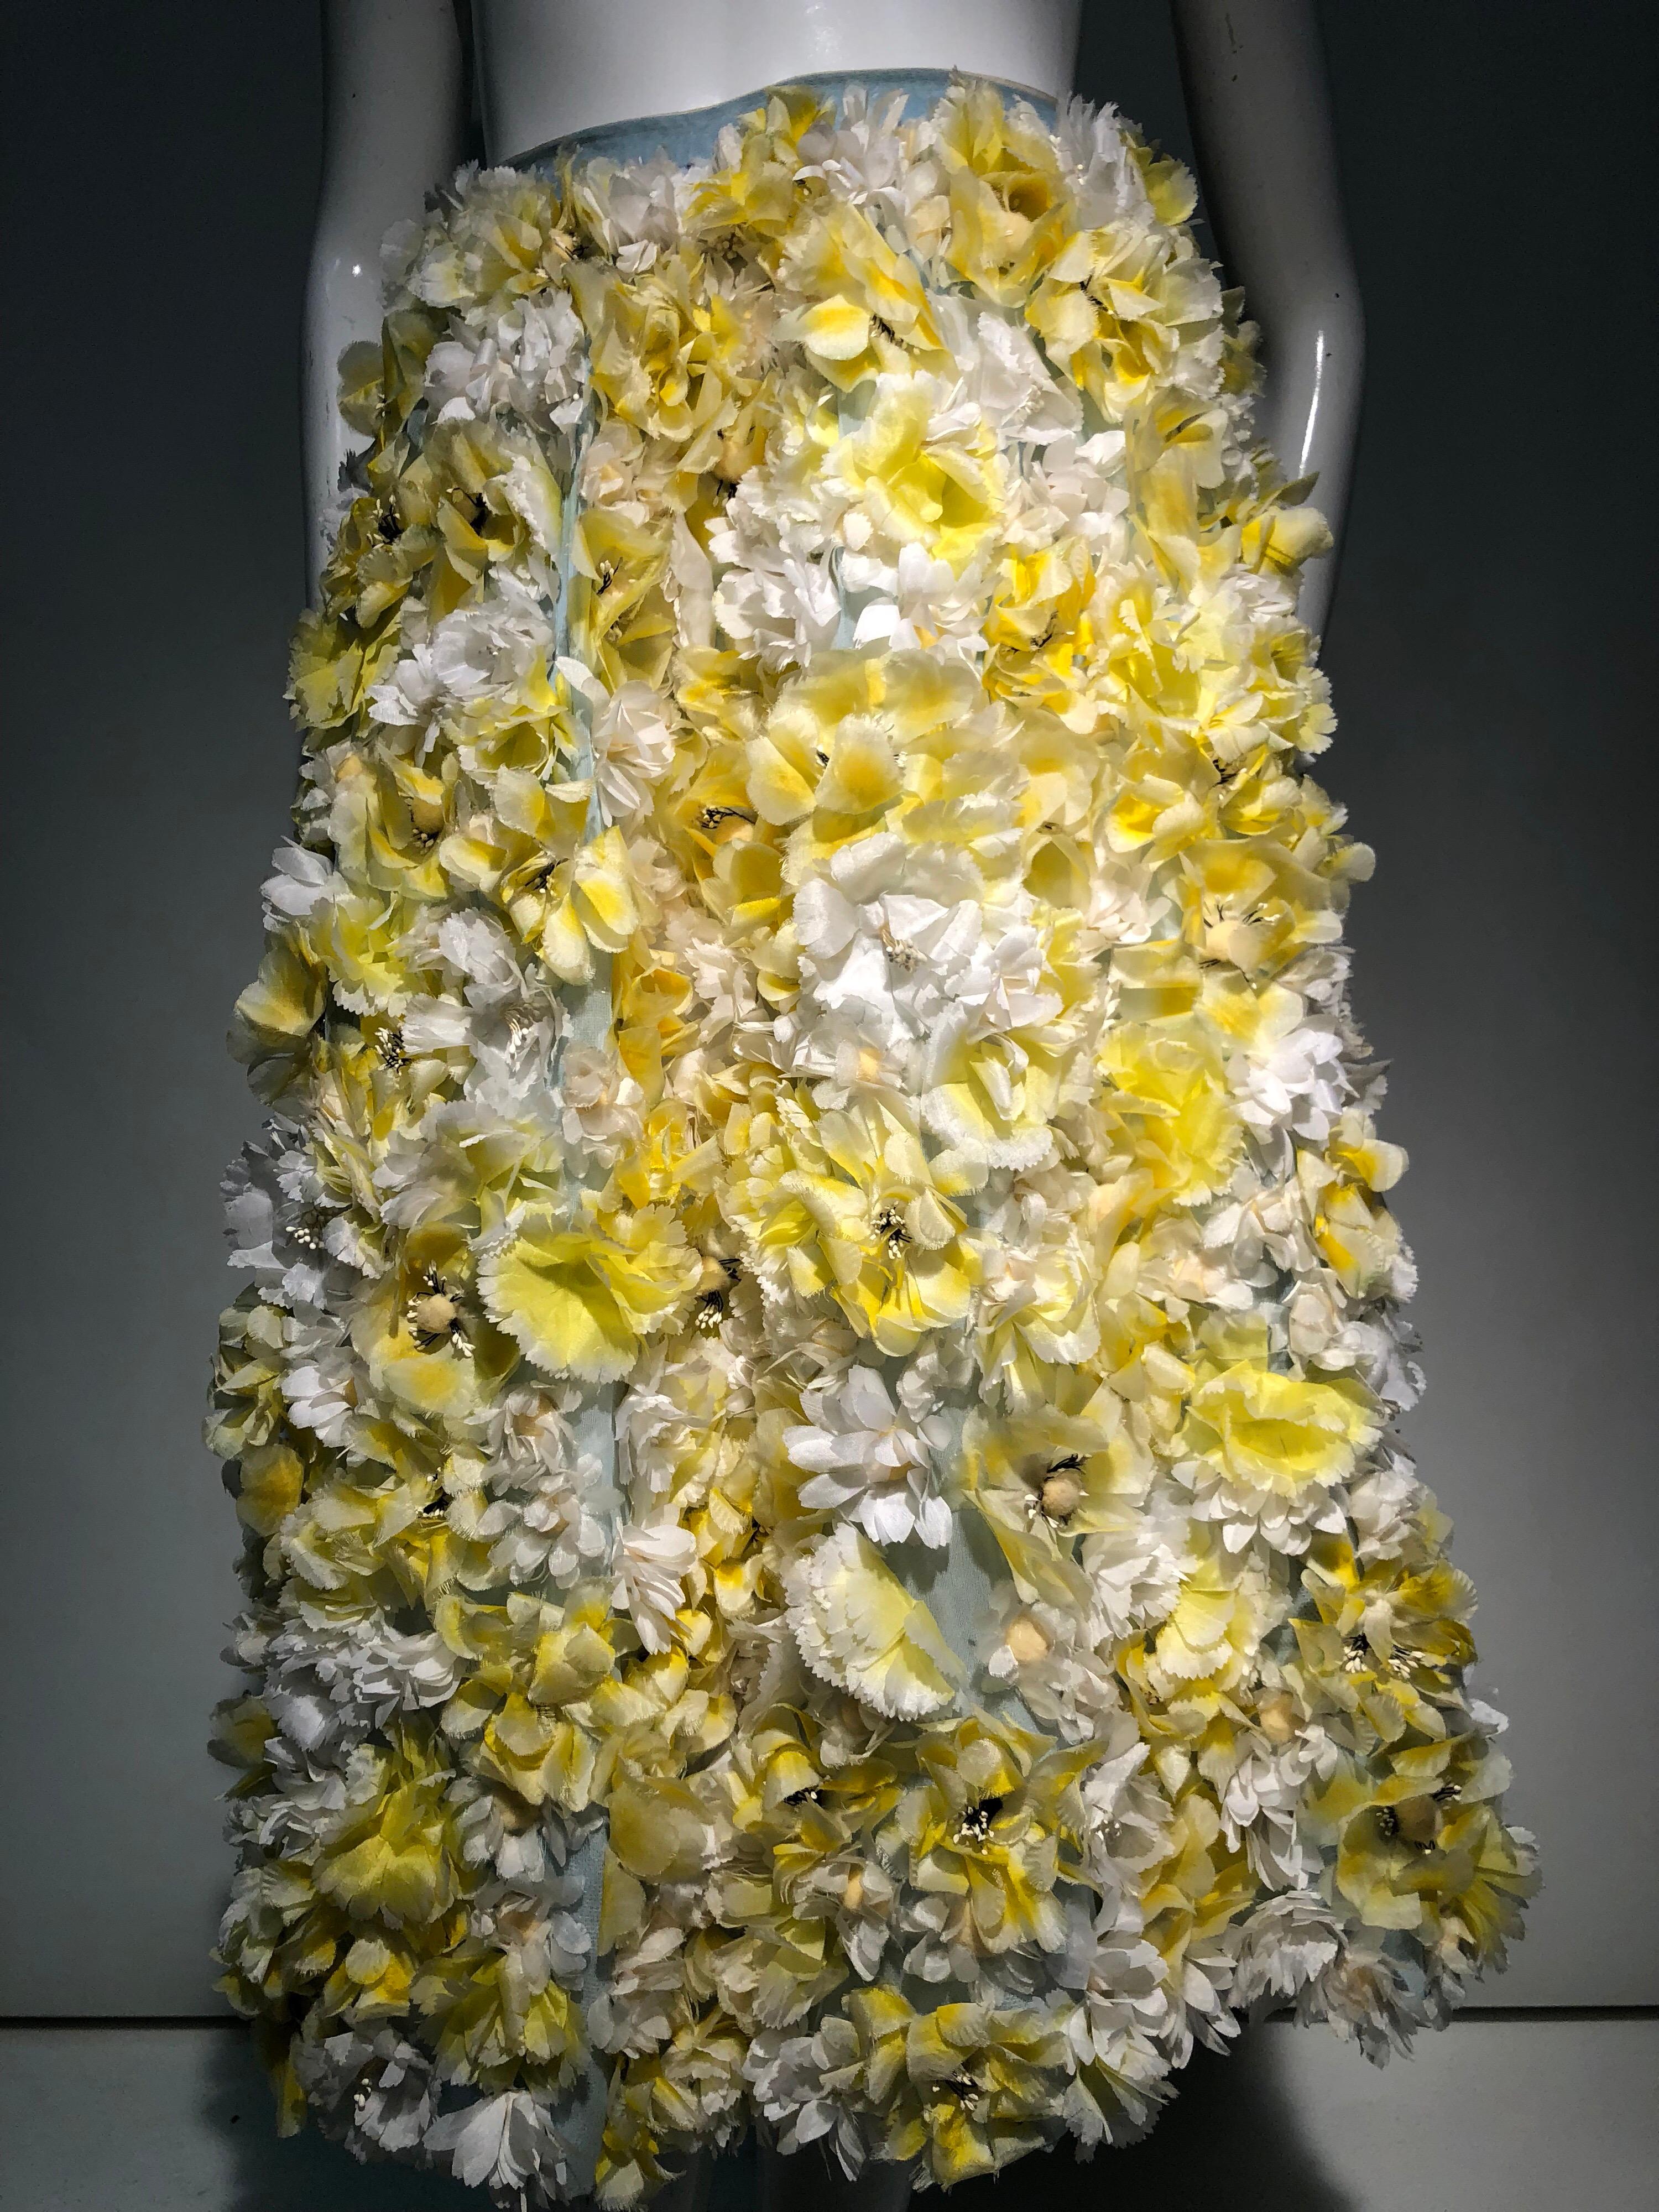 1960s Adolpho Floral Fantasy Ball Skirt In Yellow & White Silk Flowers 4